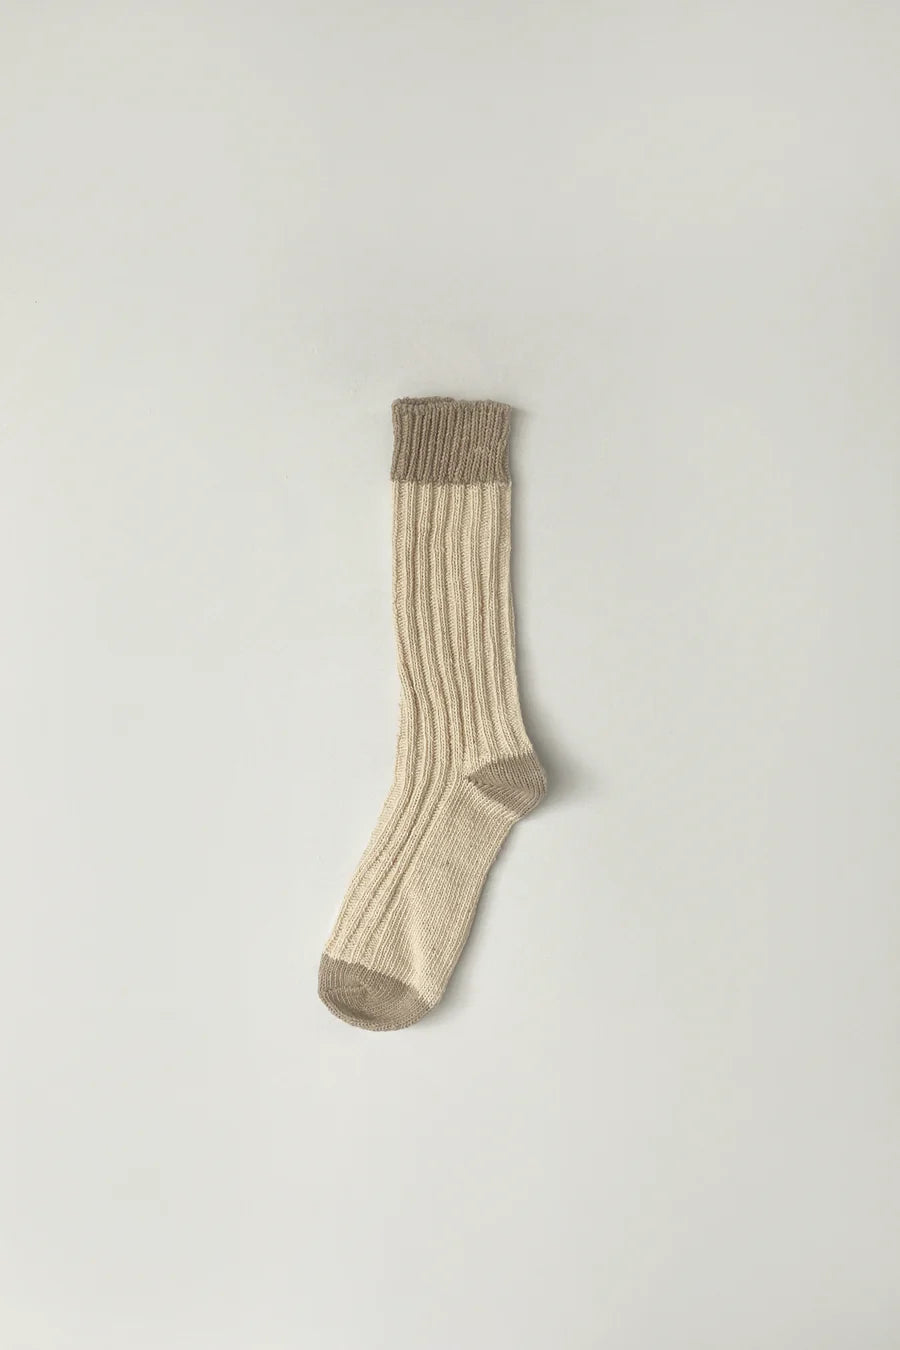 The Woven Sock, Cream and Neutral